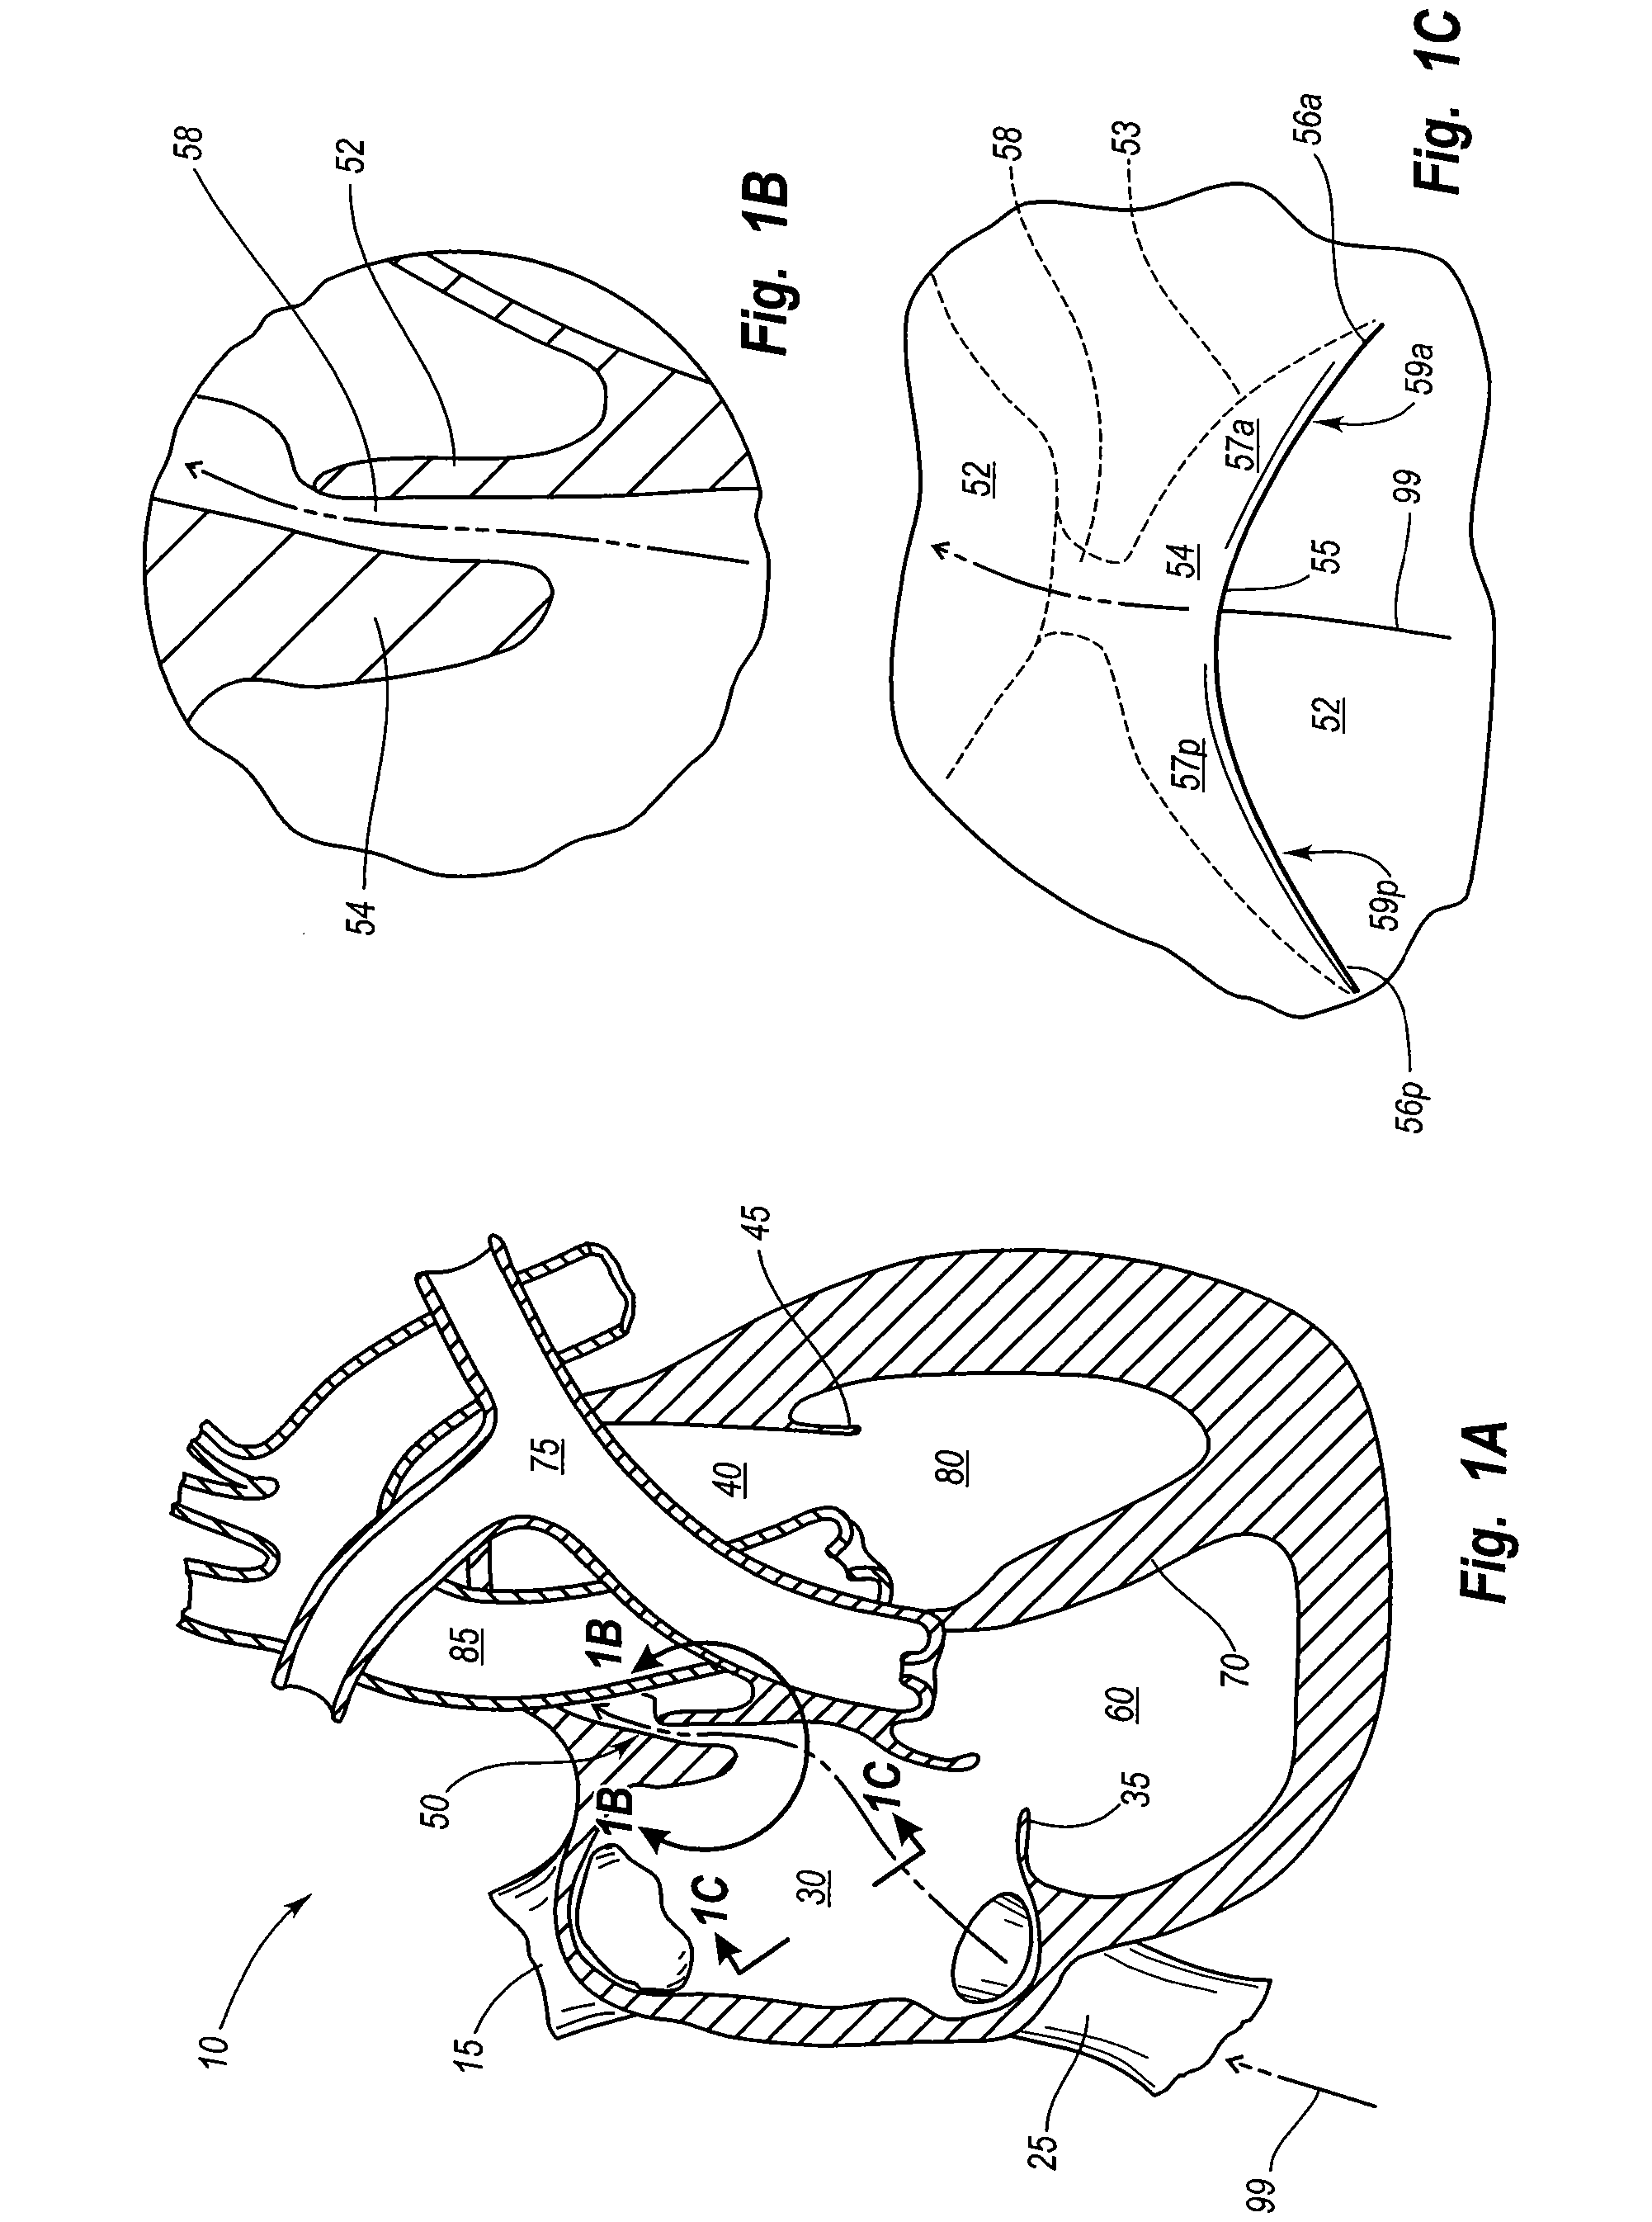 Delivery system for patent foramen ovale closure device